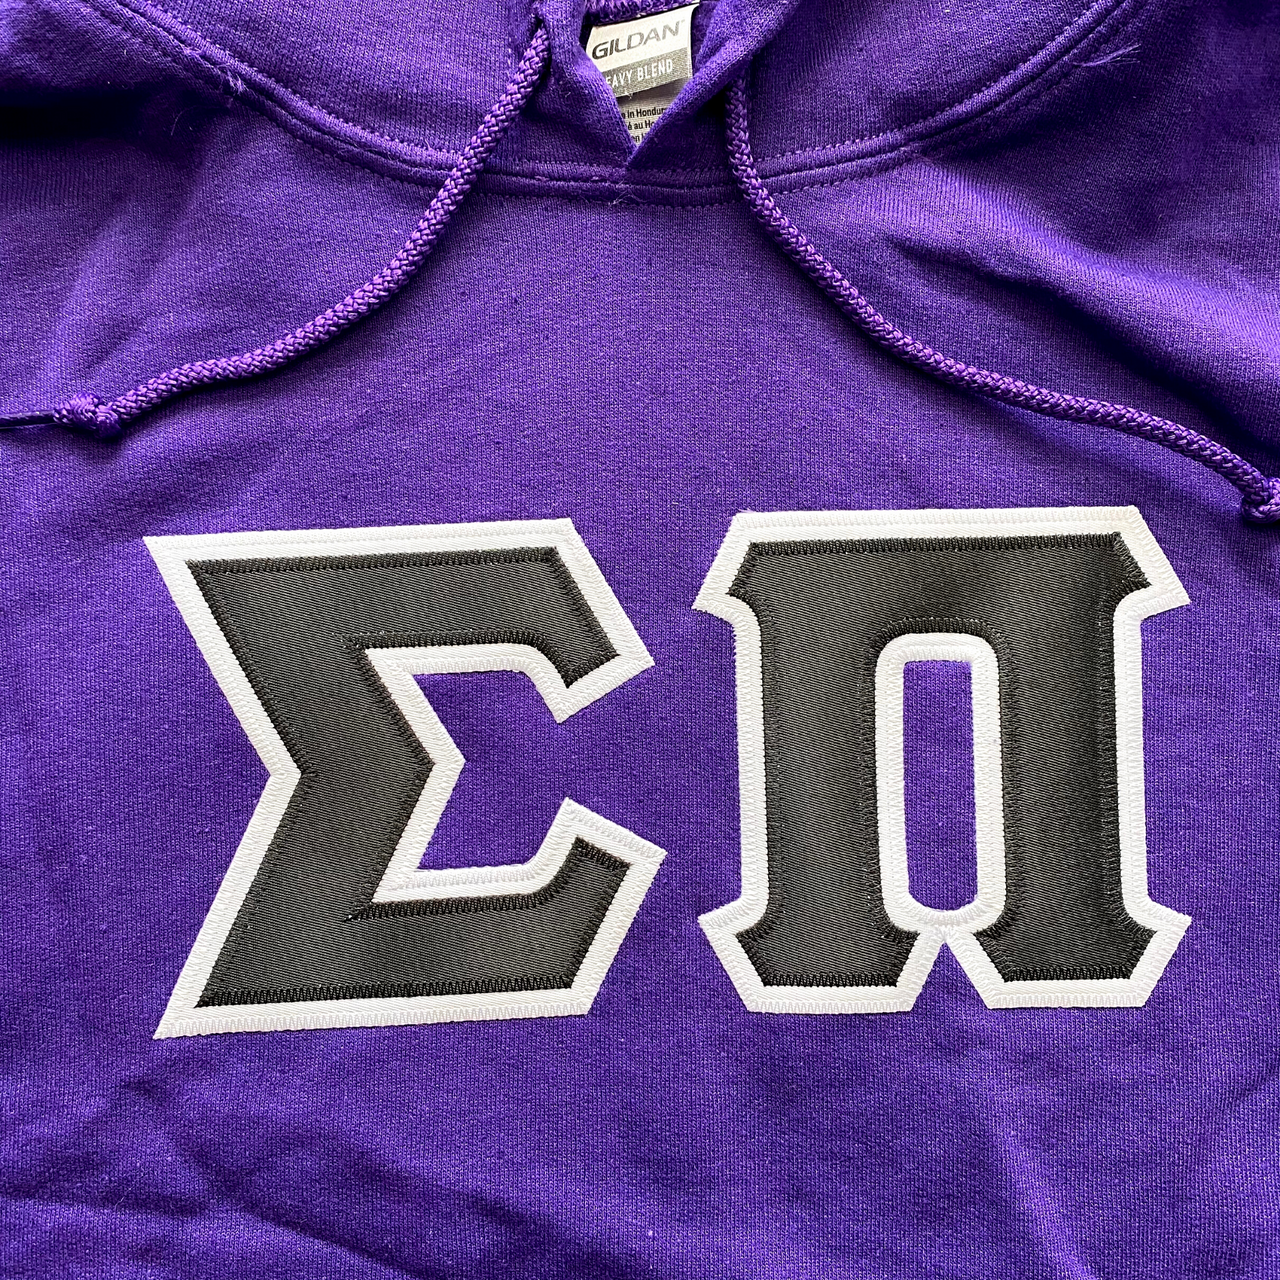 Sigma Pi Stitched Letter Hoodie | Purple | Black with White Border